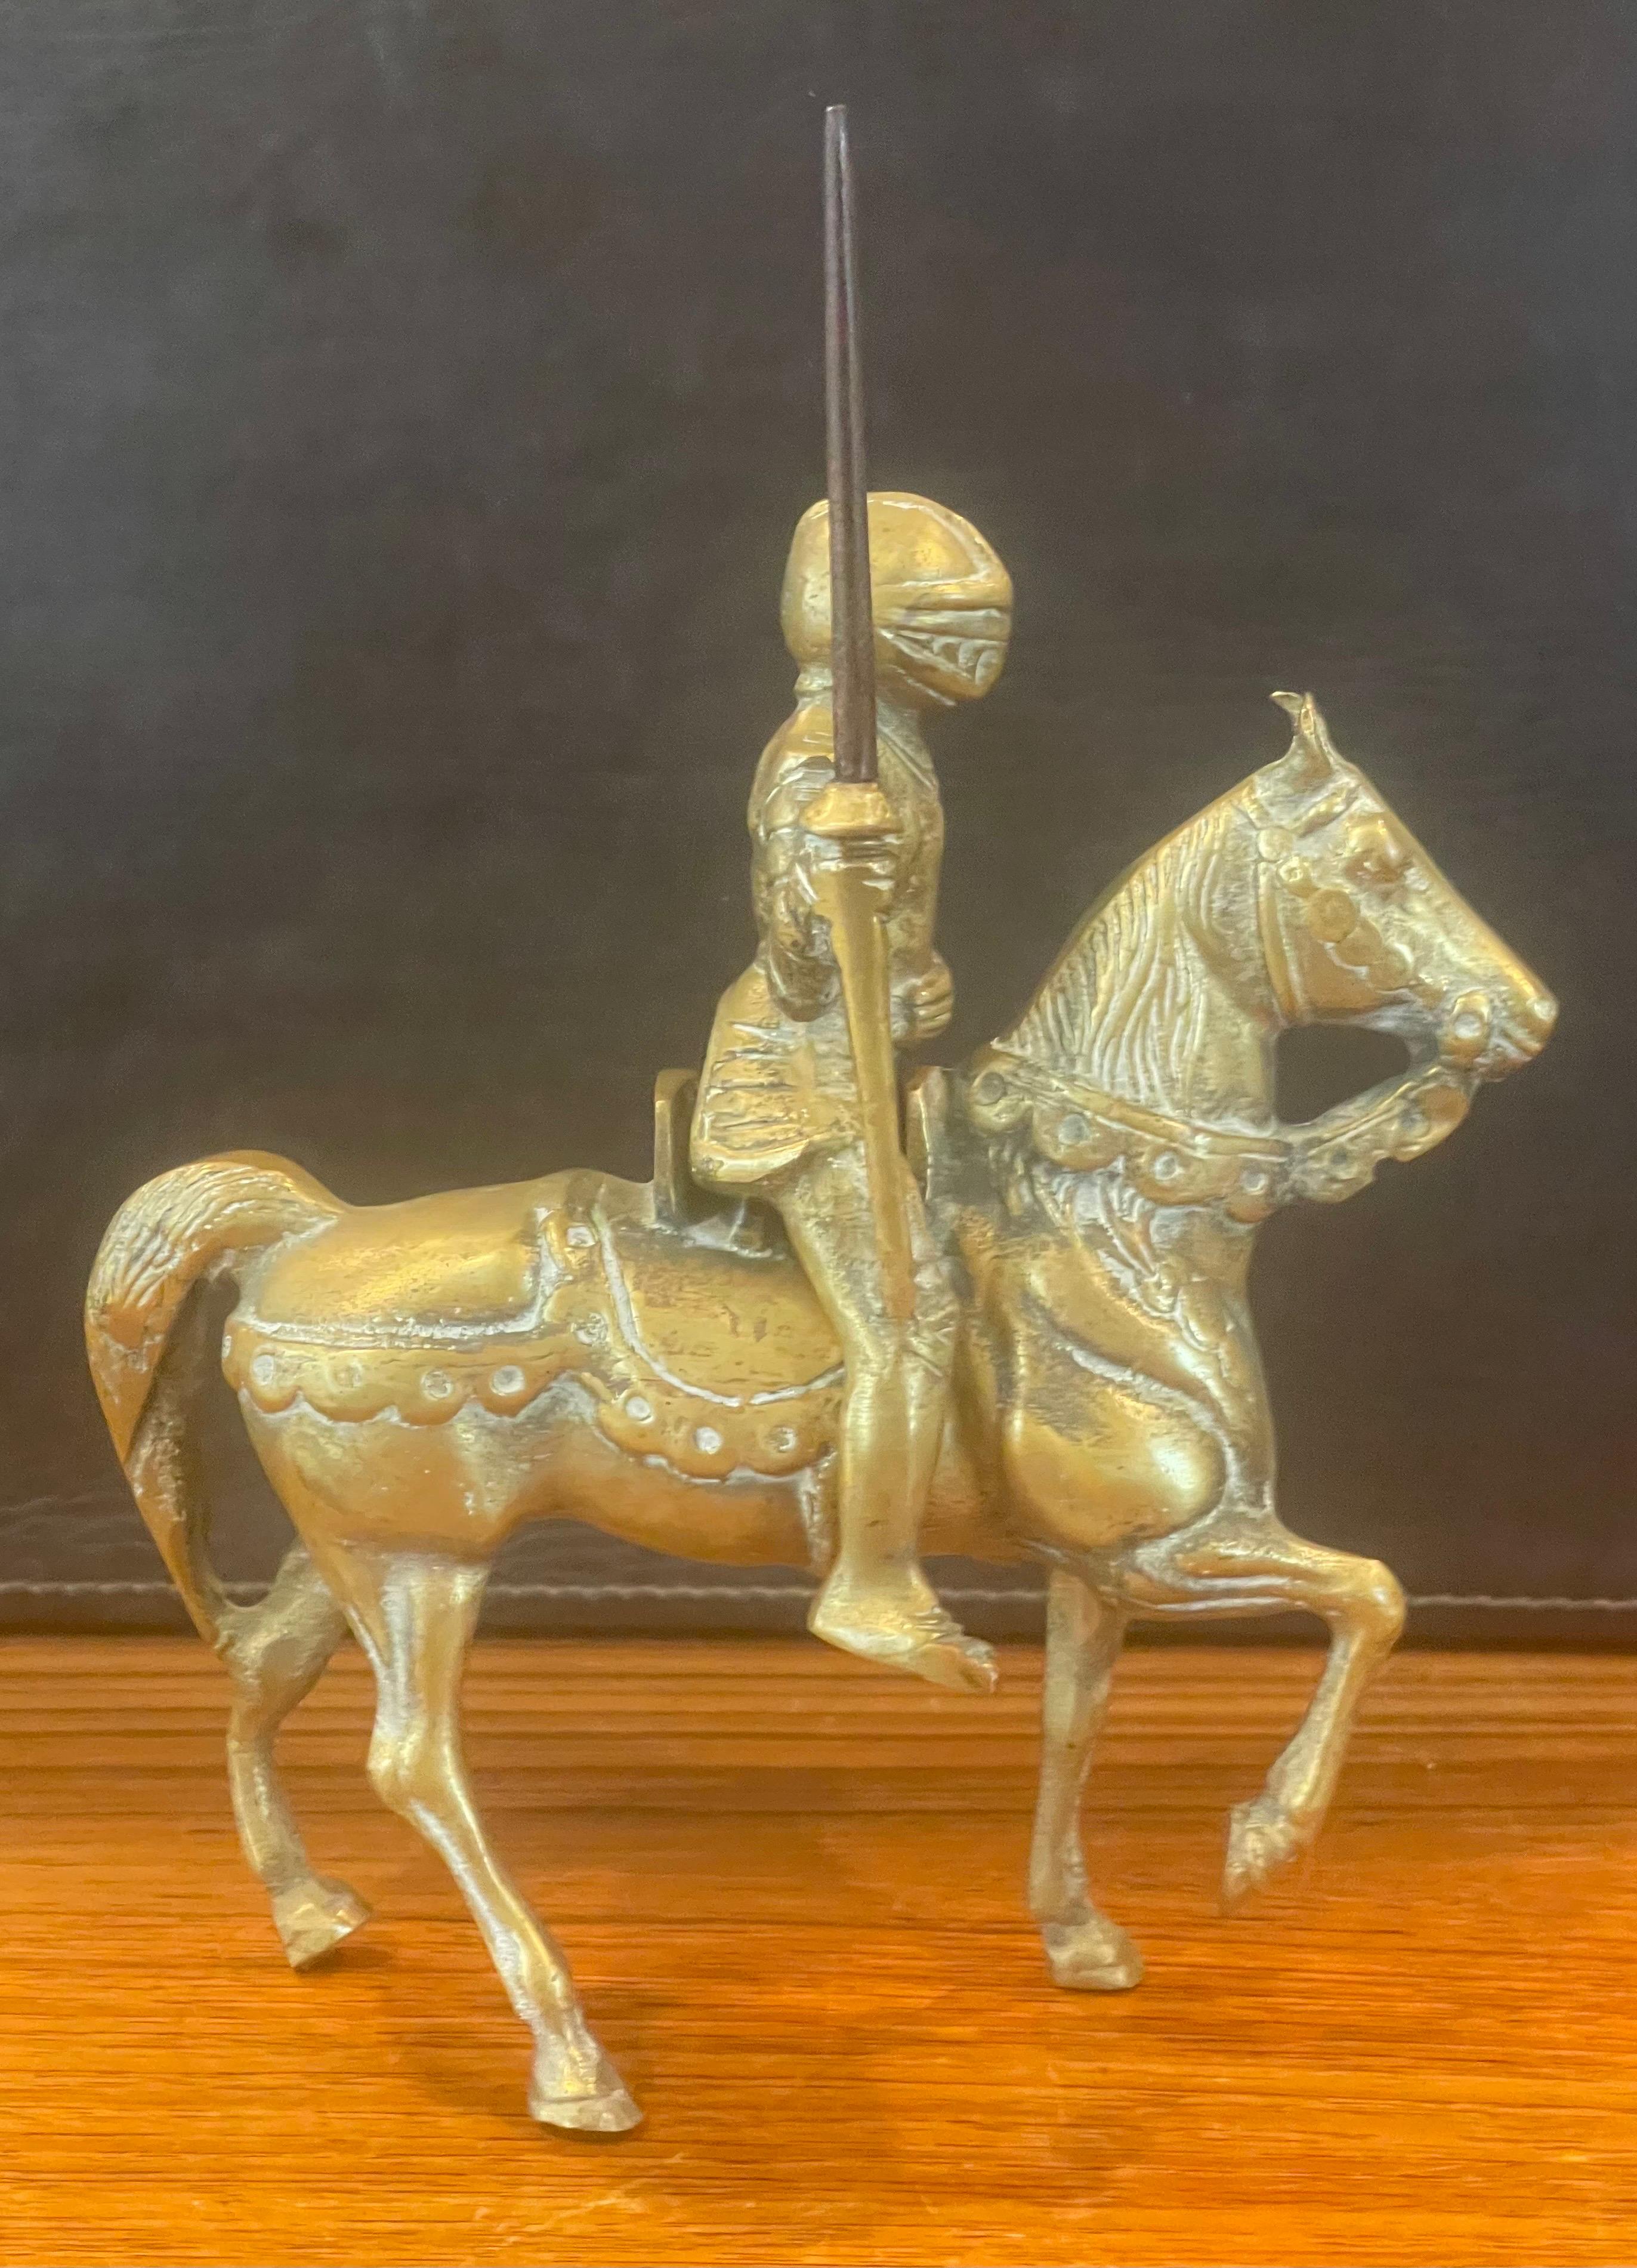 Solid Cast Brass Medieval Armored Knight on Horse Sculpture For Sale 2